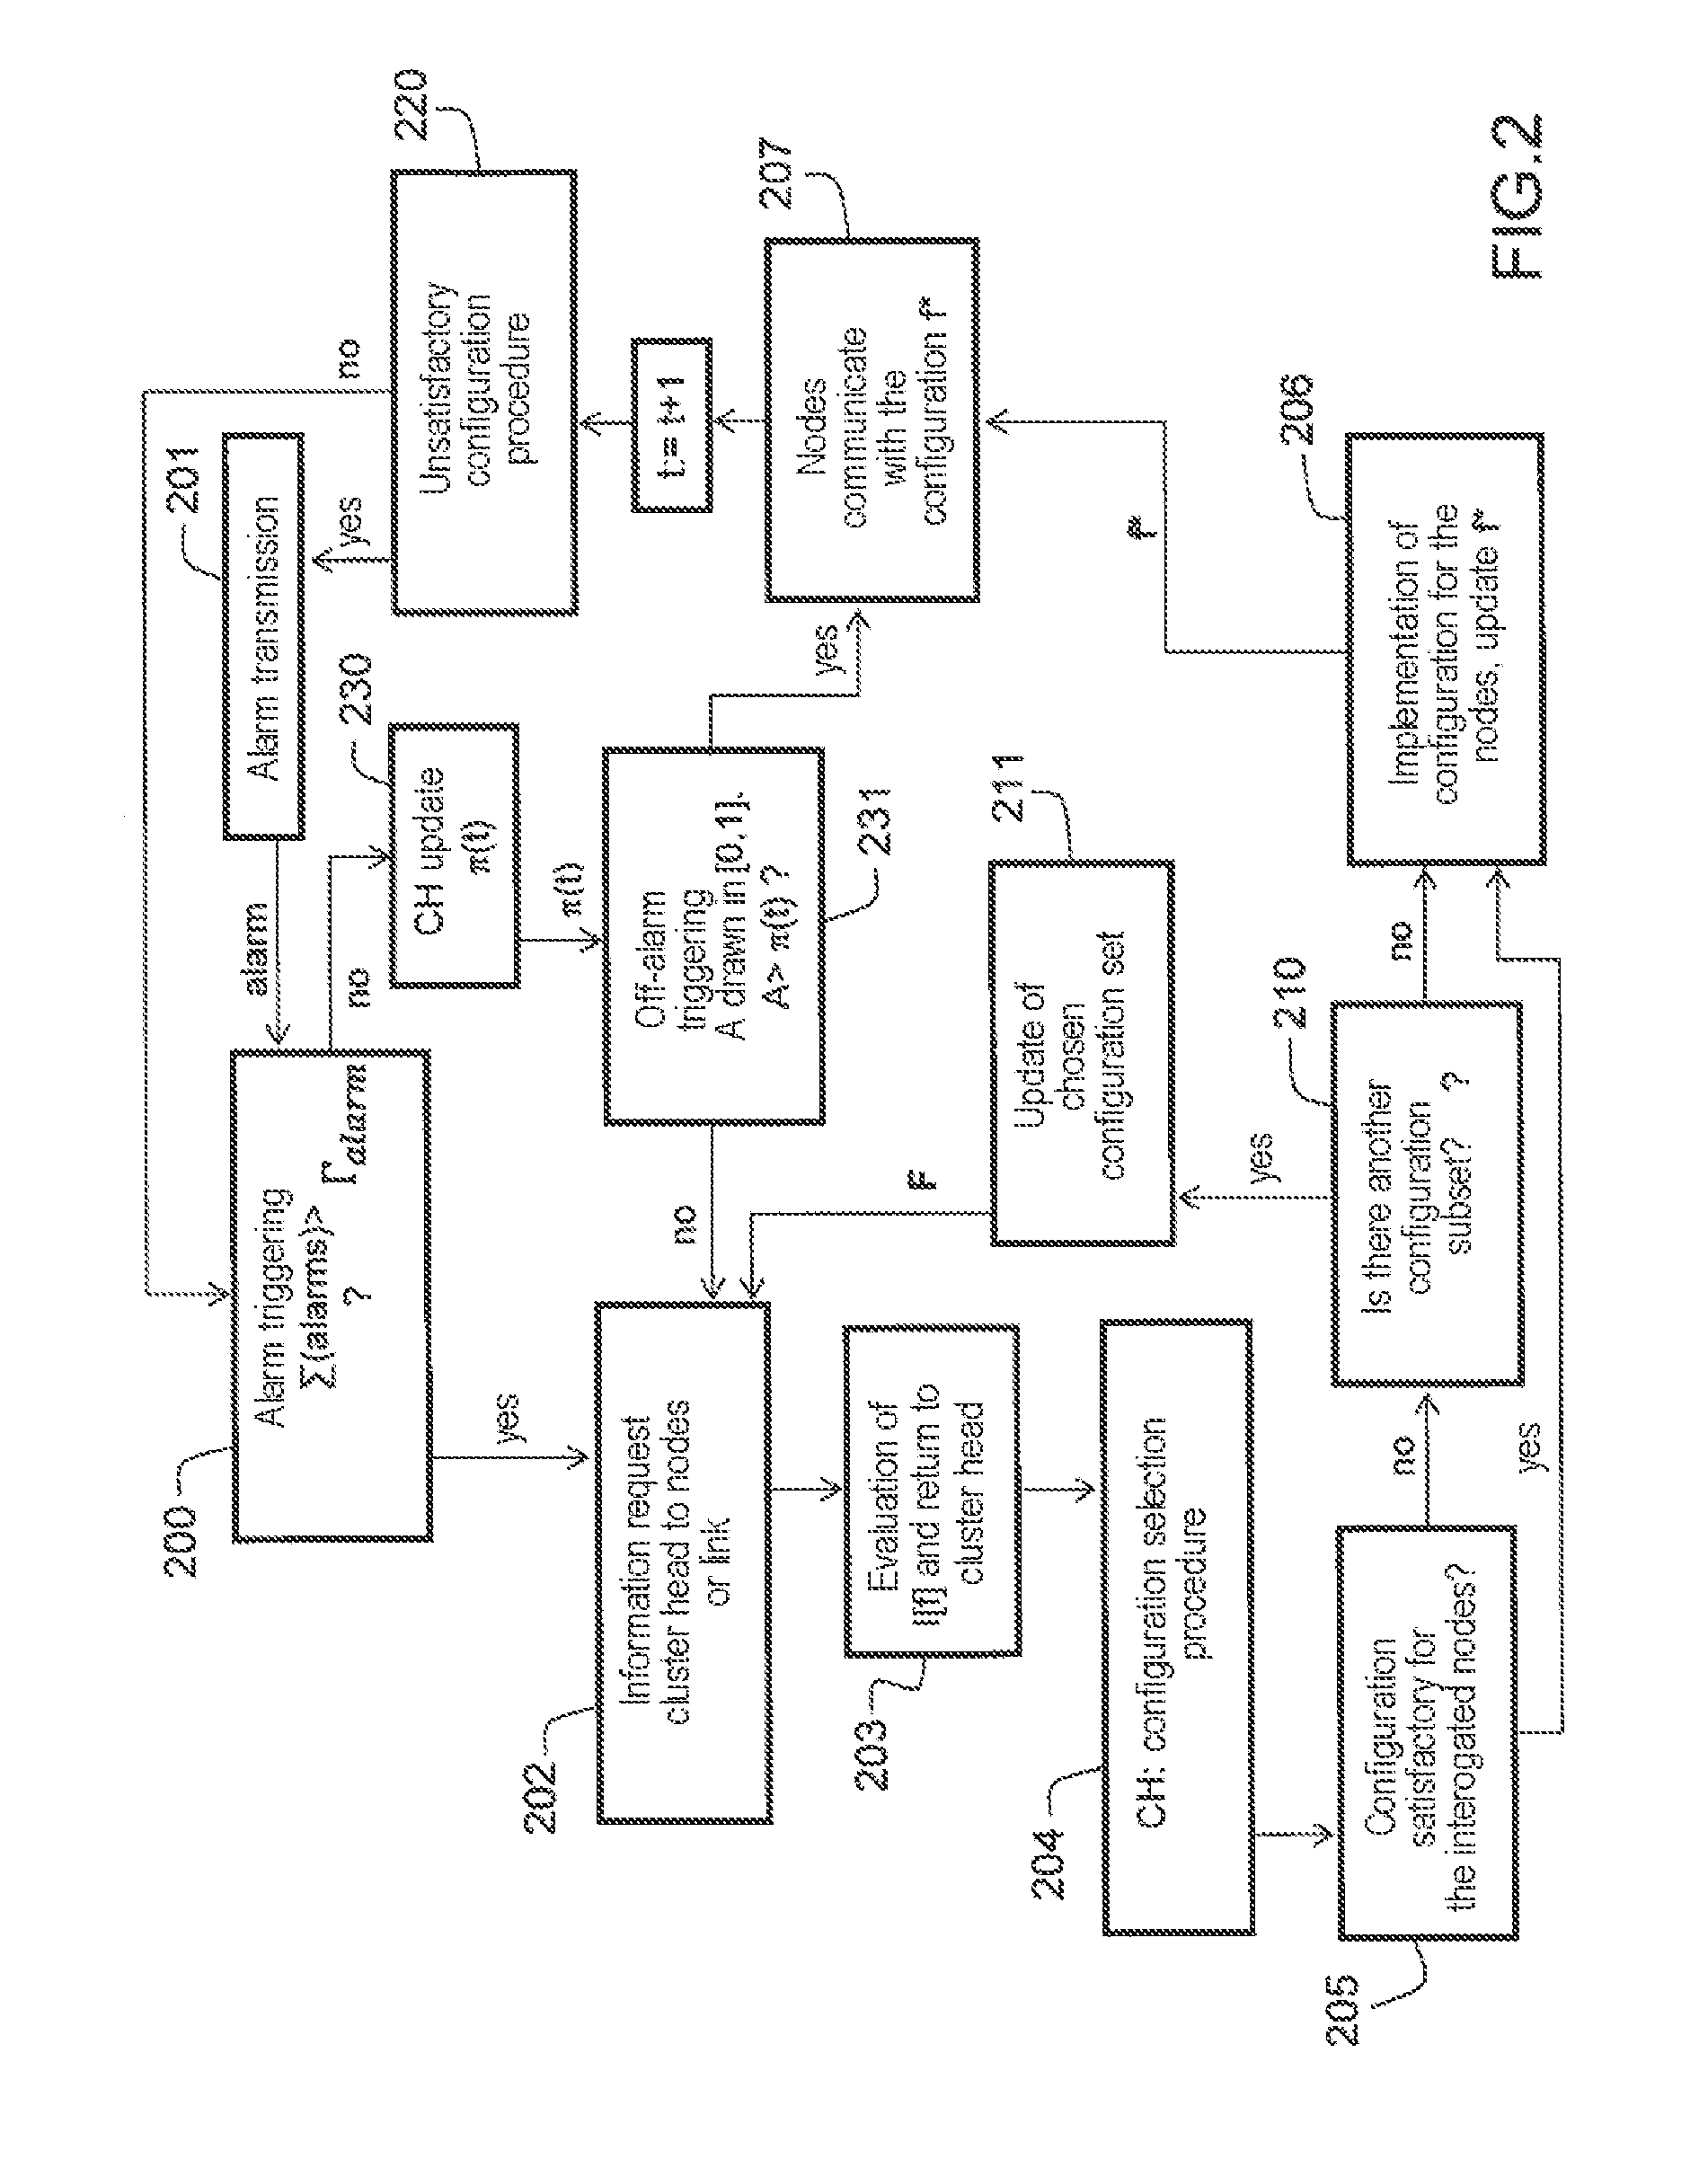 Distributed method for selecting a configuration in mobile networks